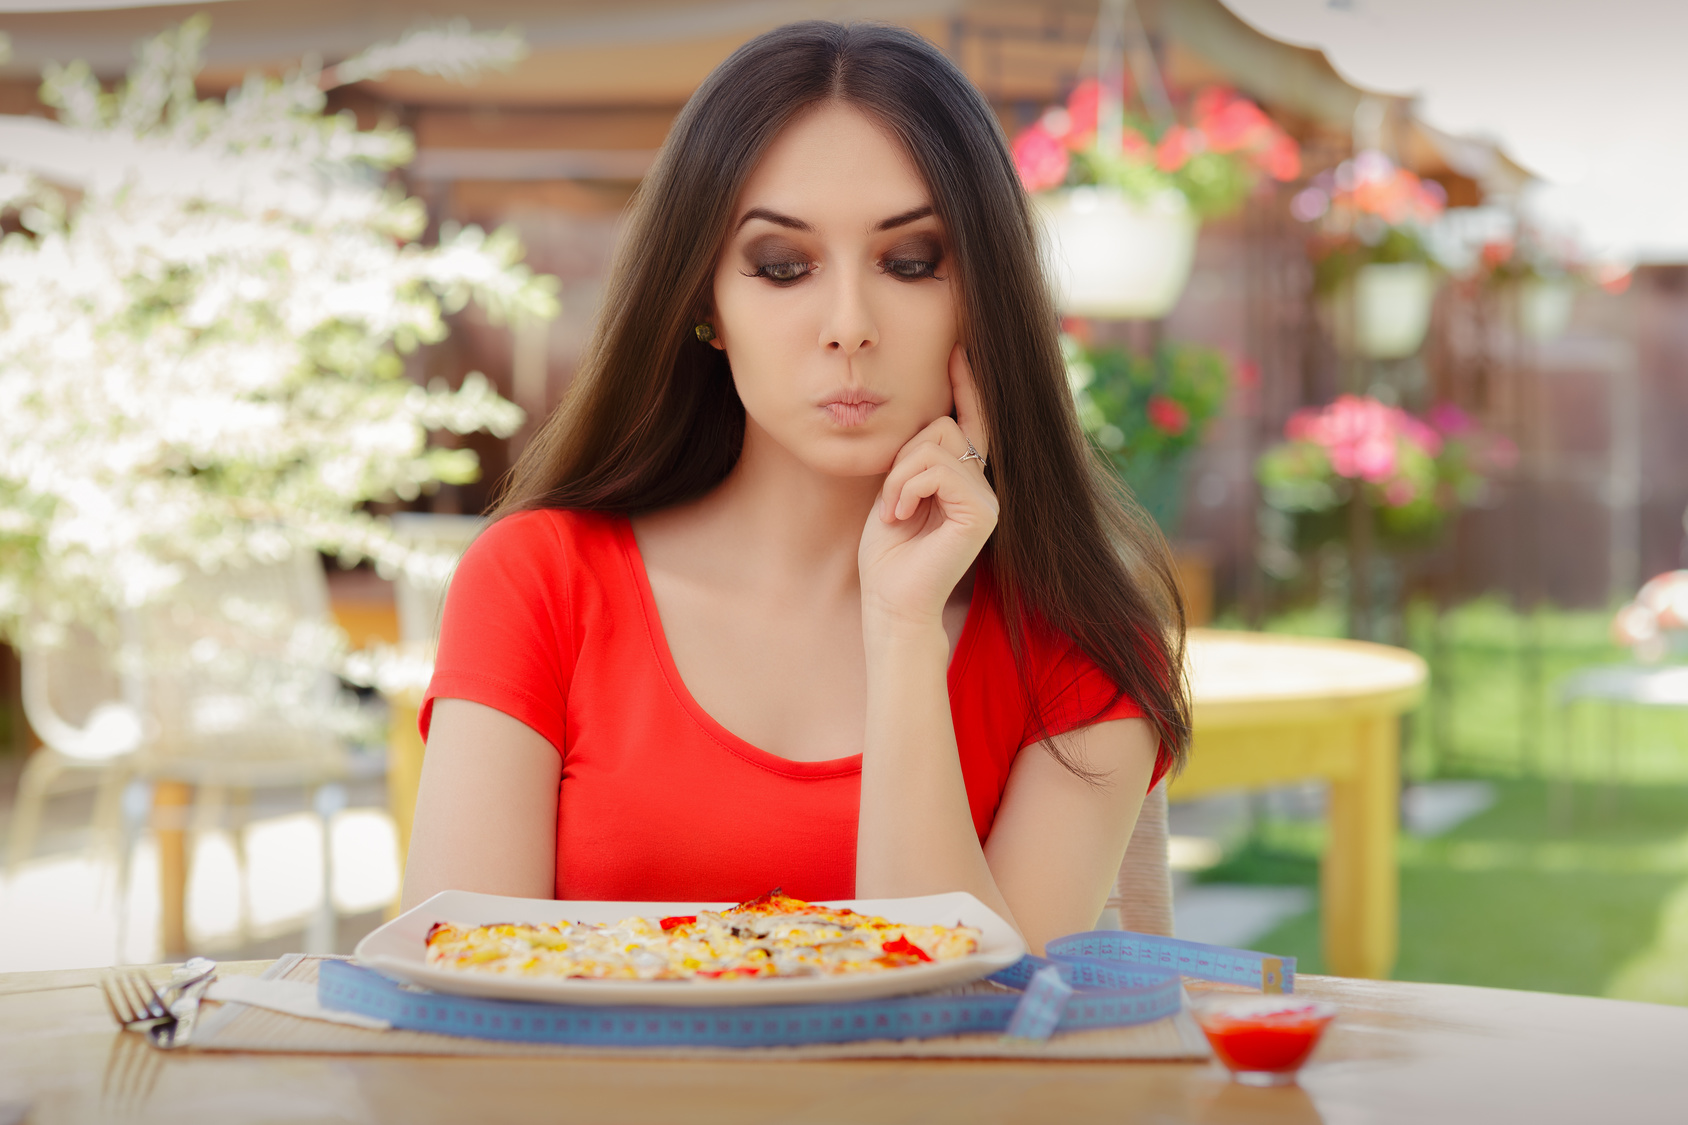 Young Woman Thinking About Eating Pizza on a Diet